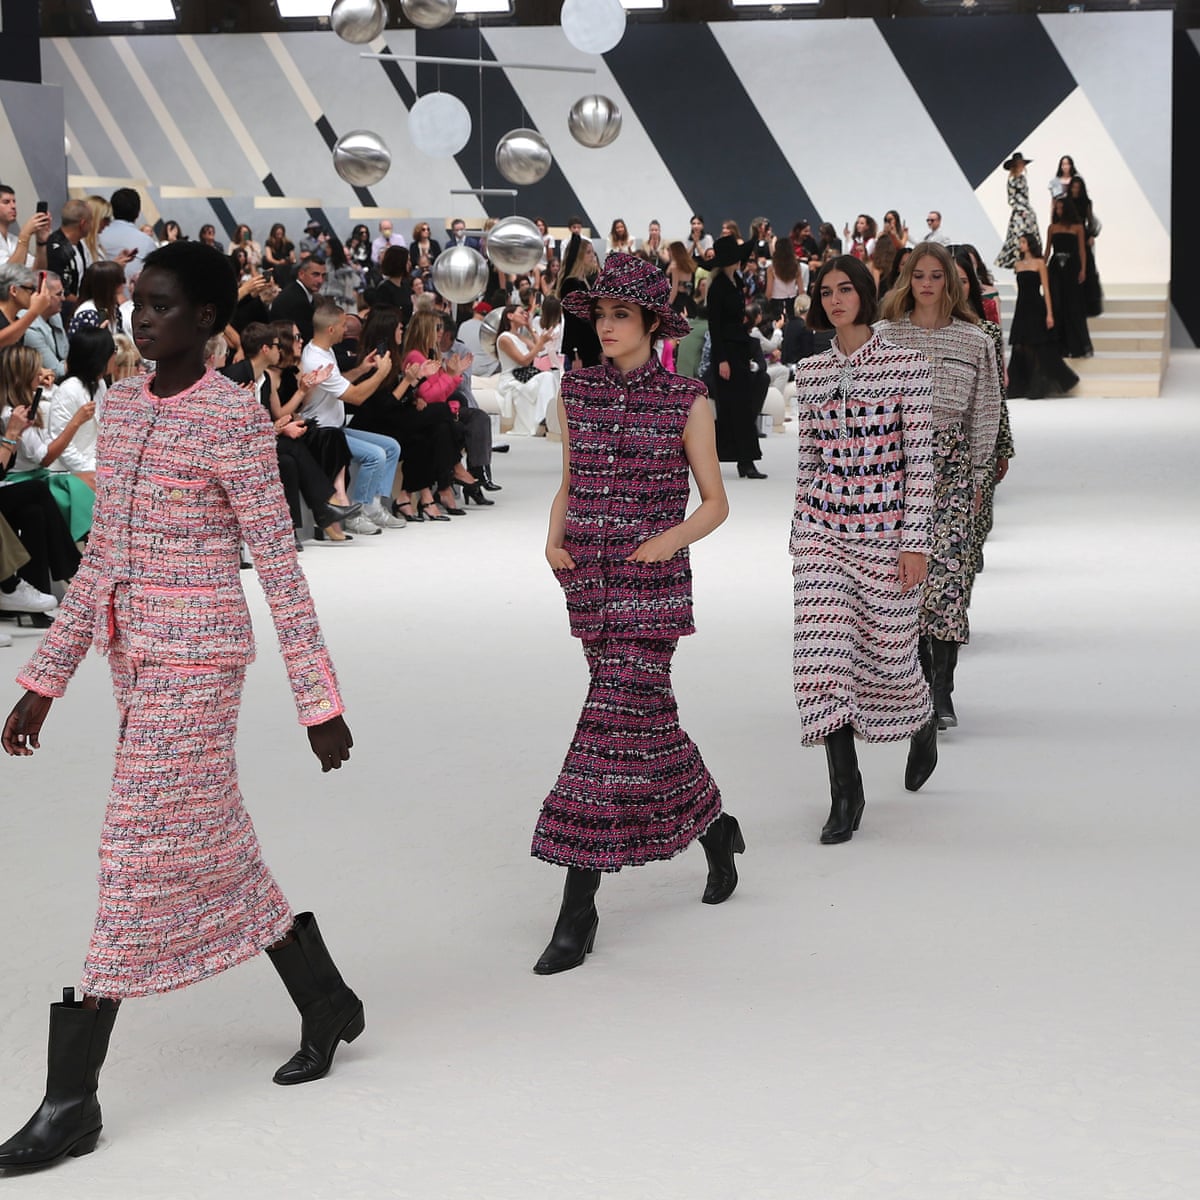 Culture and easy elegance grace Chanel's autumn/winter catwalk, Chanel